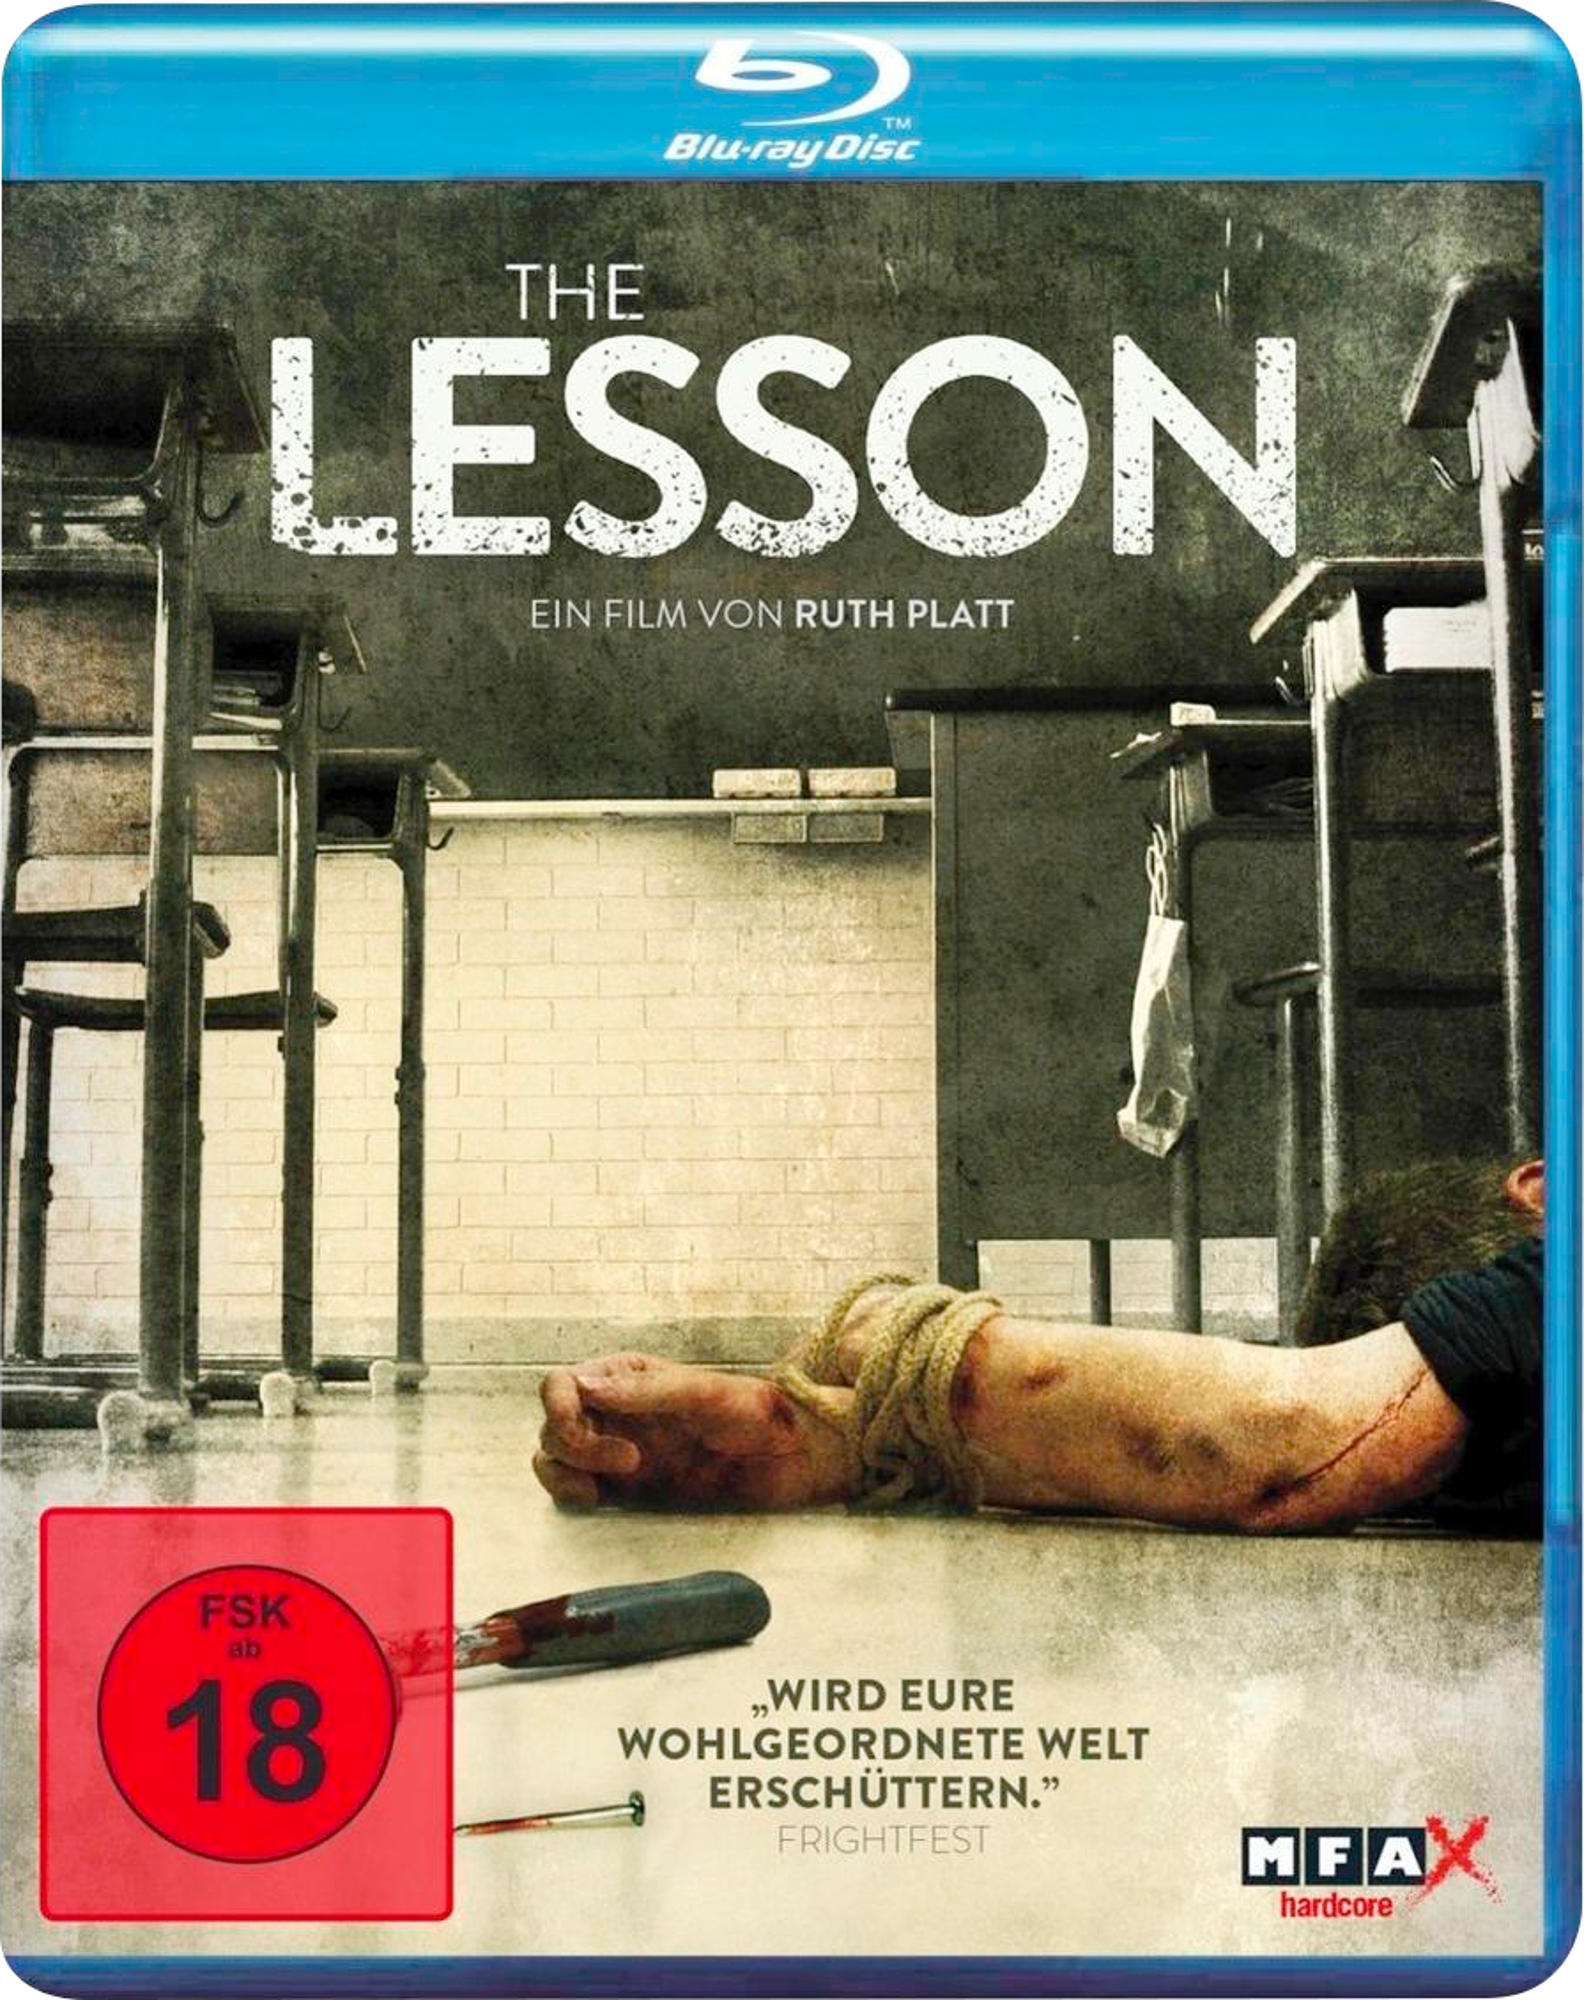 Lesson The Blu-ray